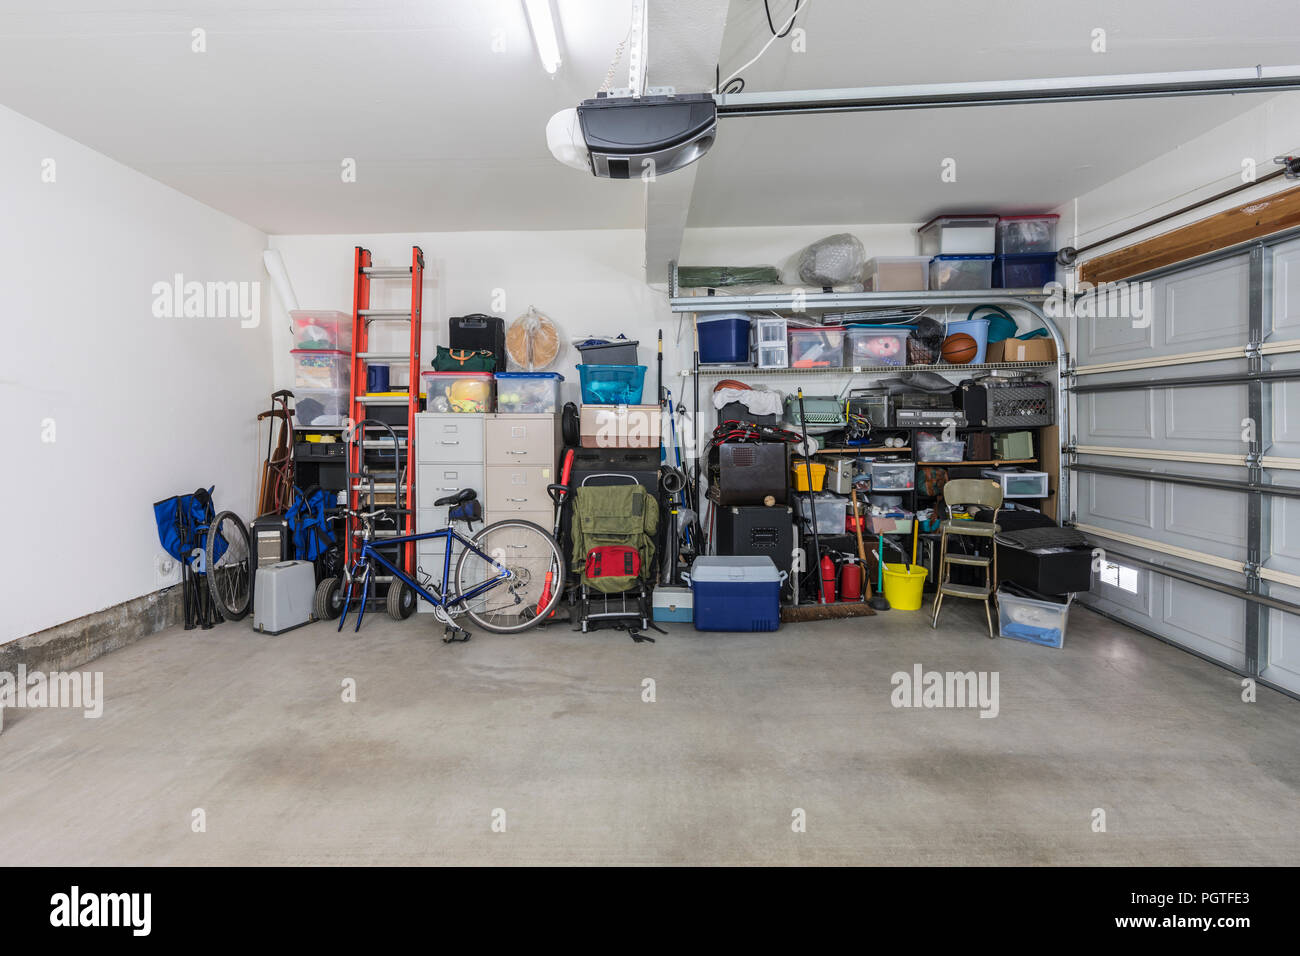 Cluttered but organized clean suburban residential two car garage with tools, file cabinets and sports equipment. Stock Photo